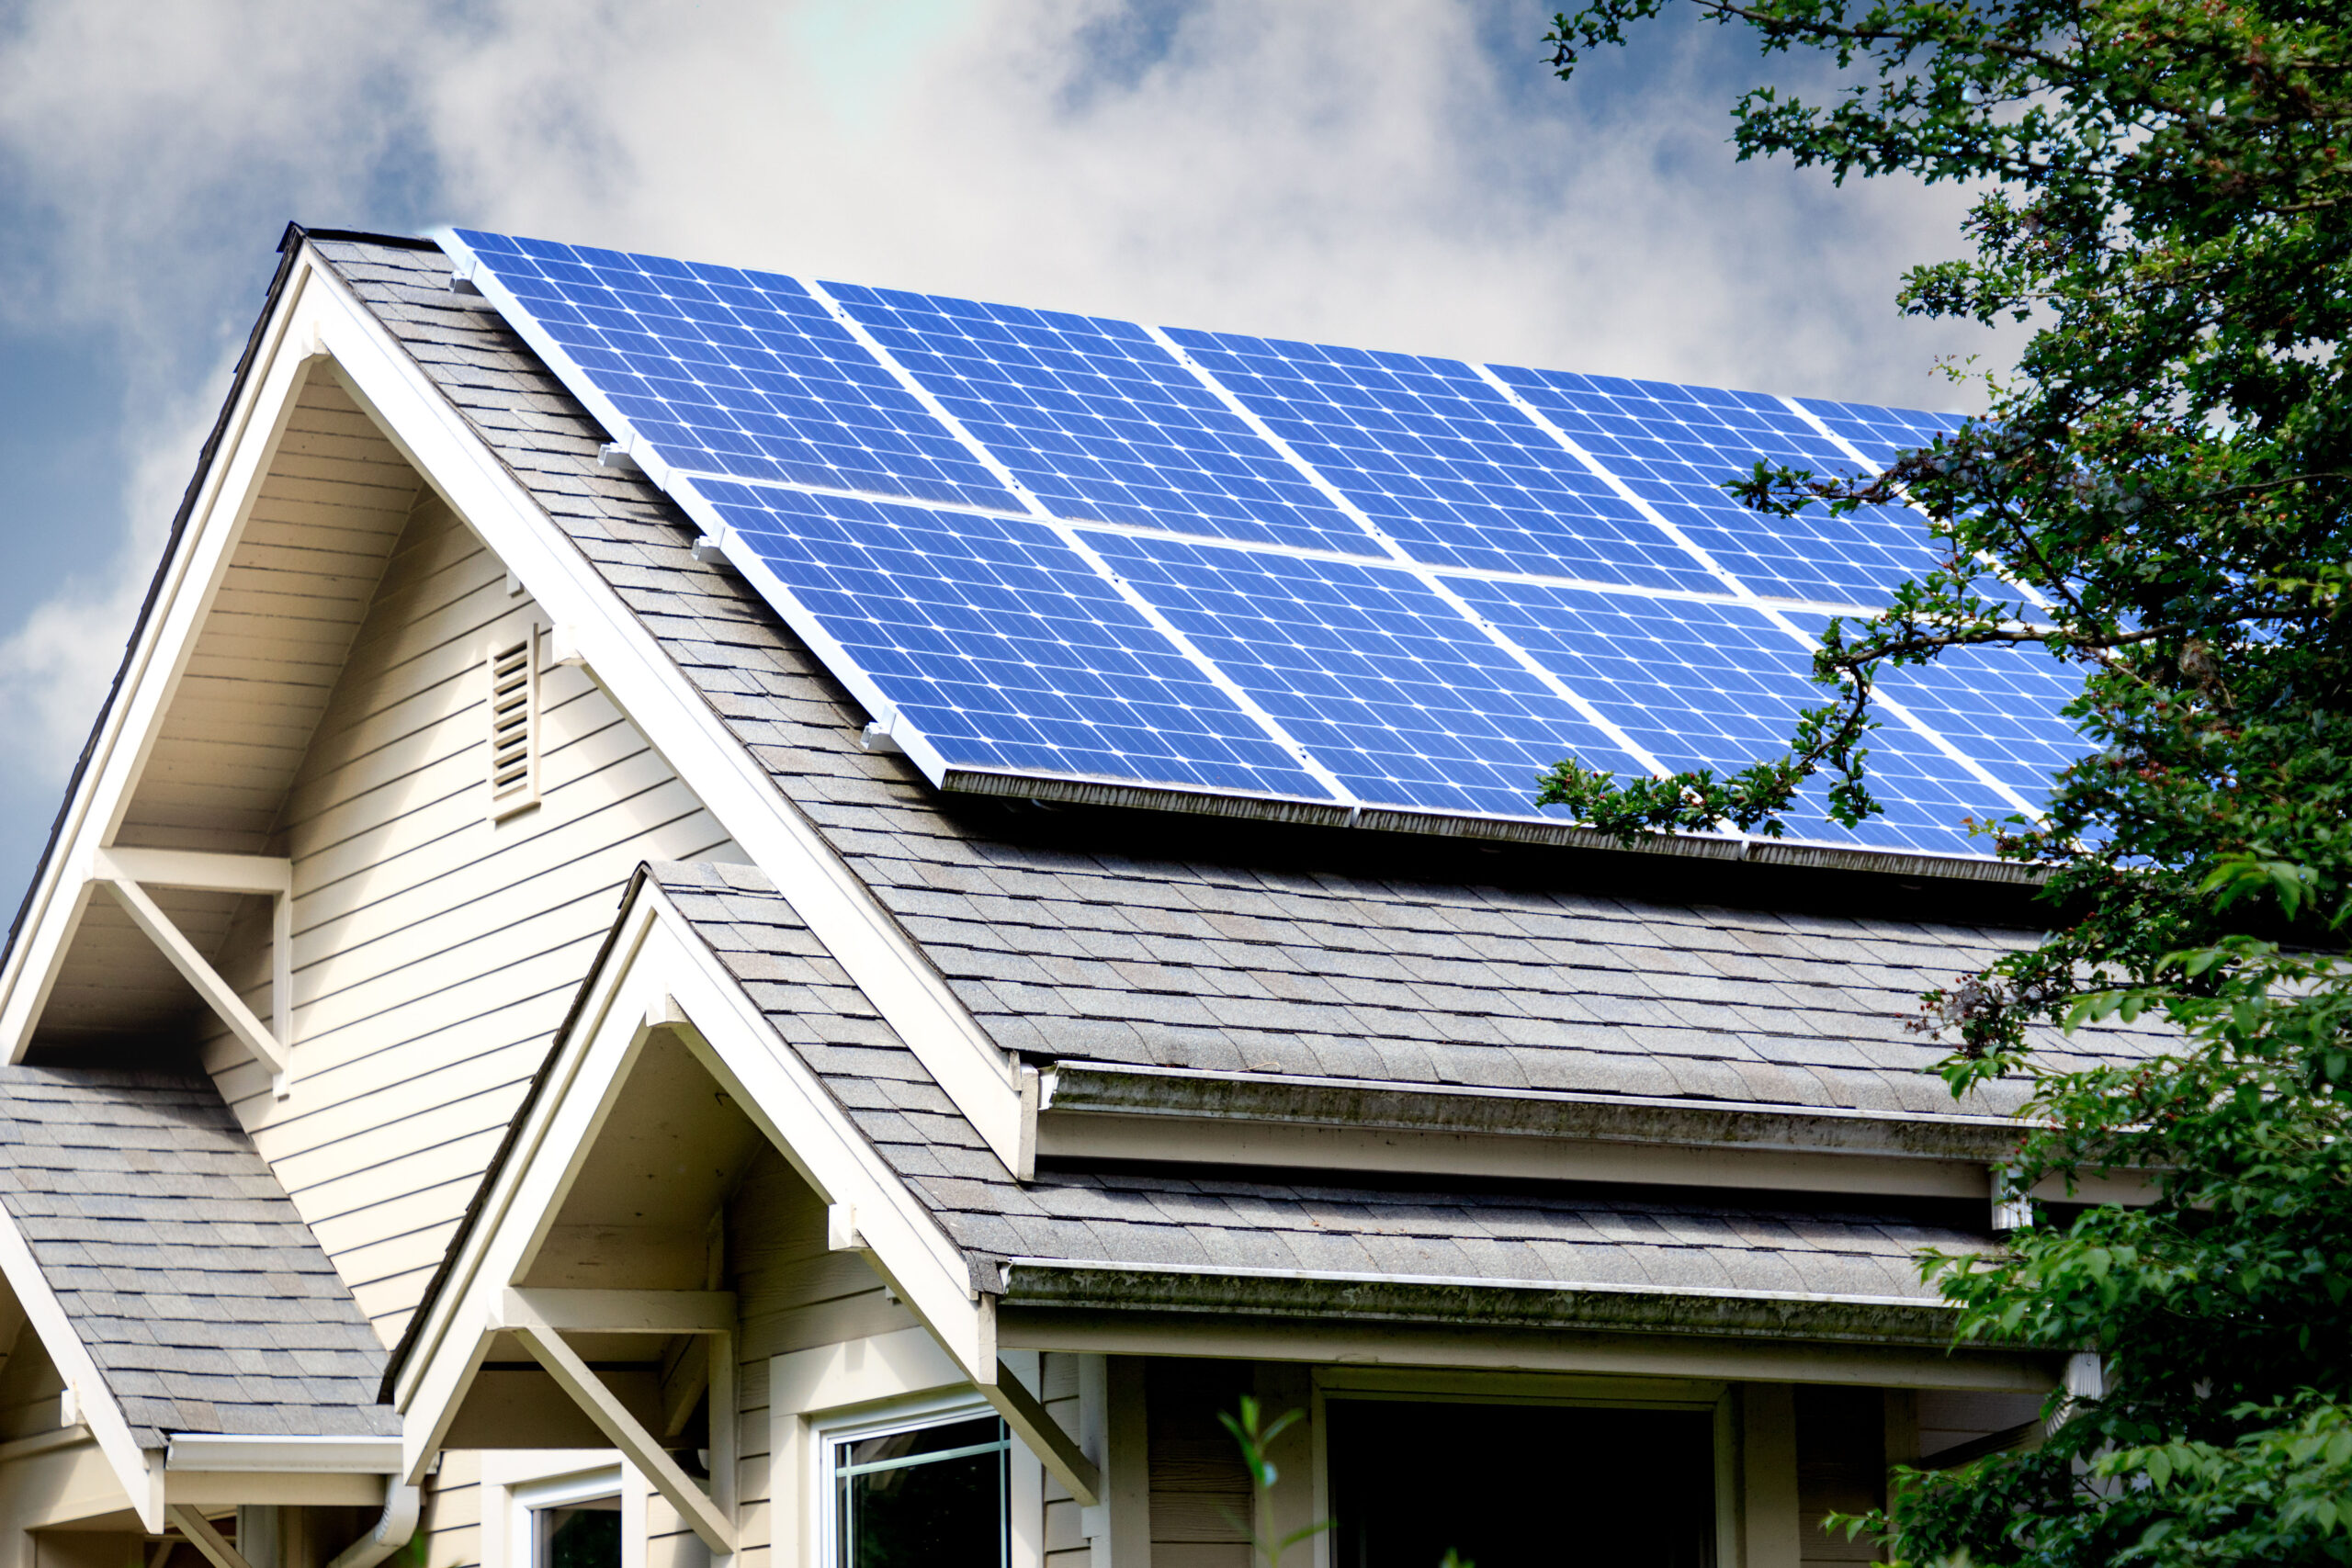 Featured image for “Why Solar Installation Has Gained in Popularity in the Past Decade”